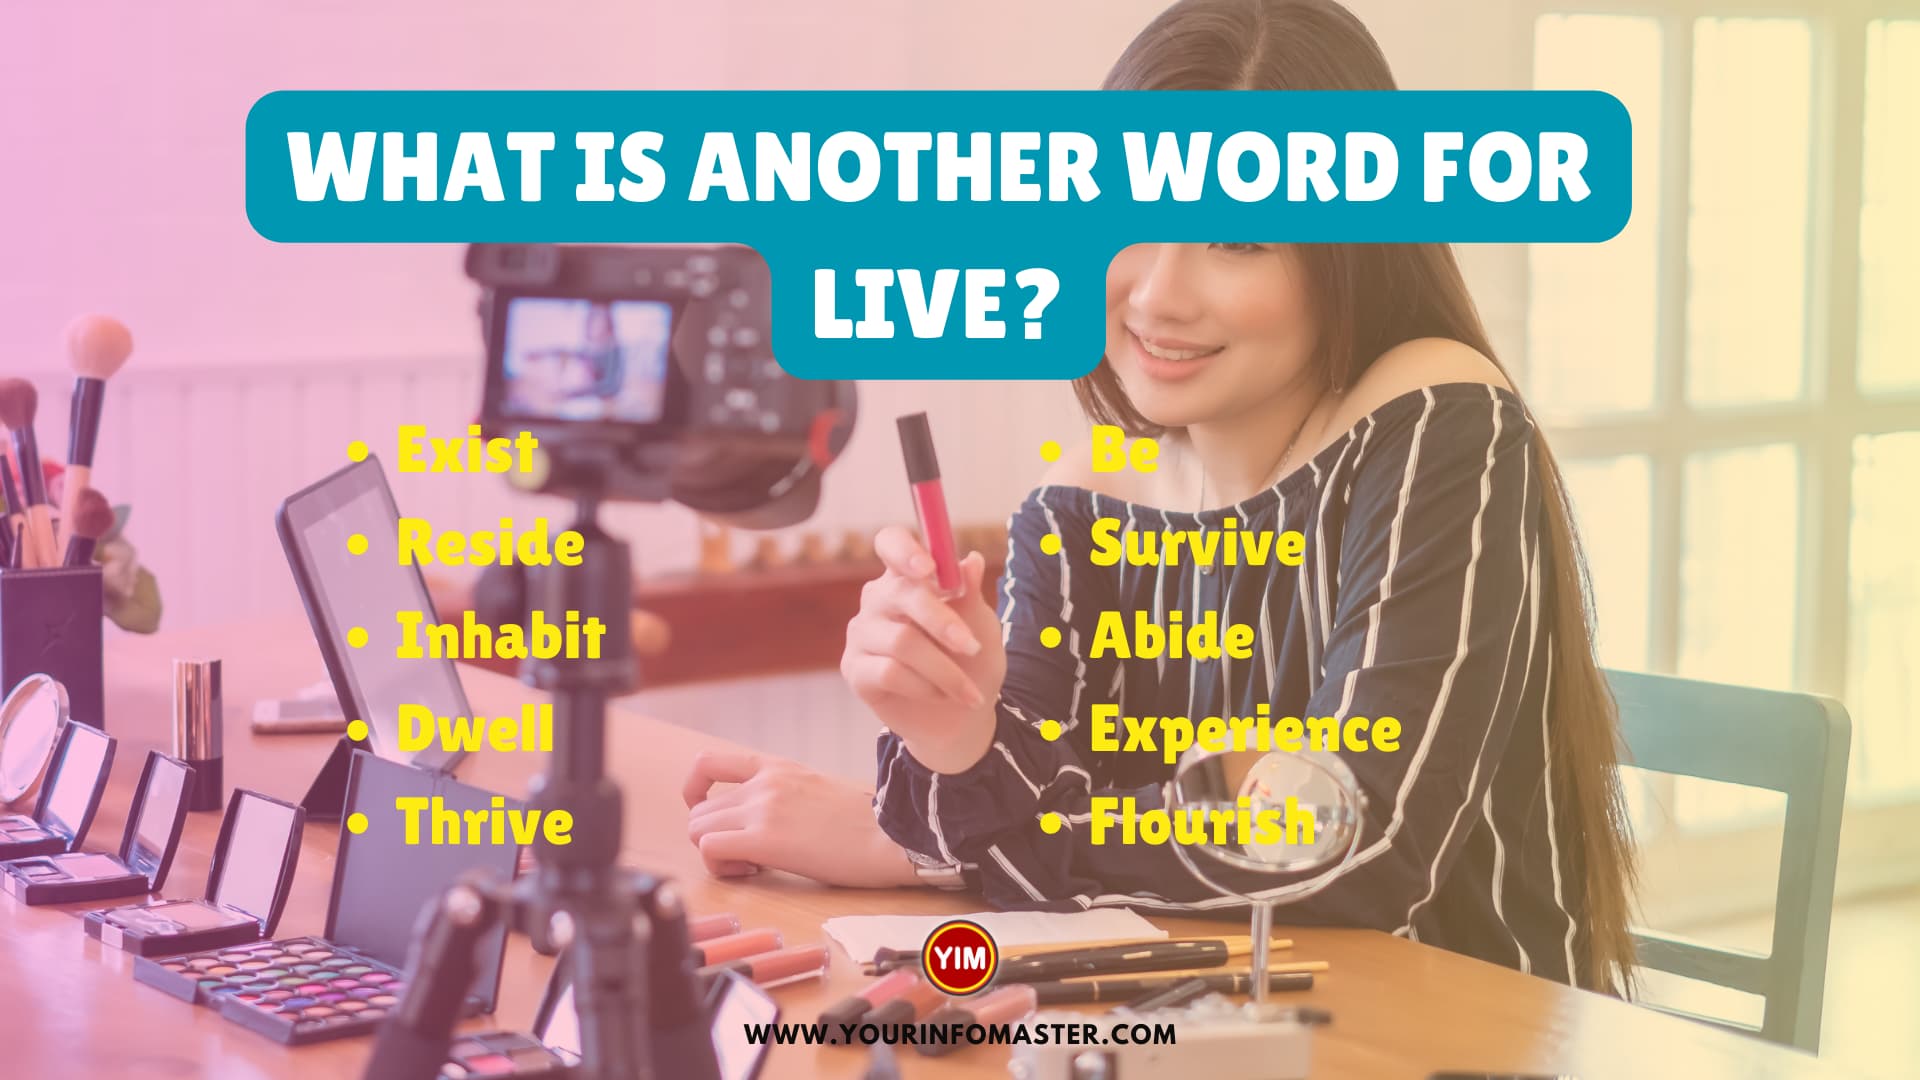 What is another word for Live